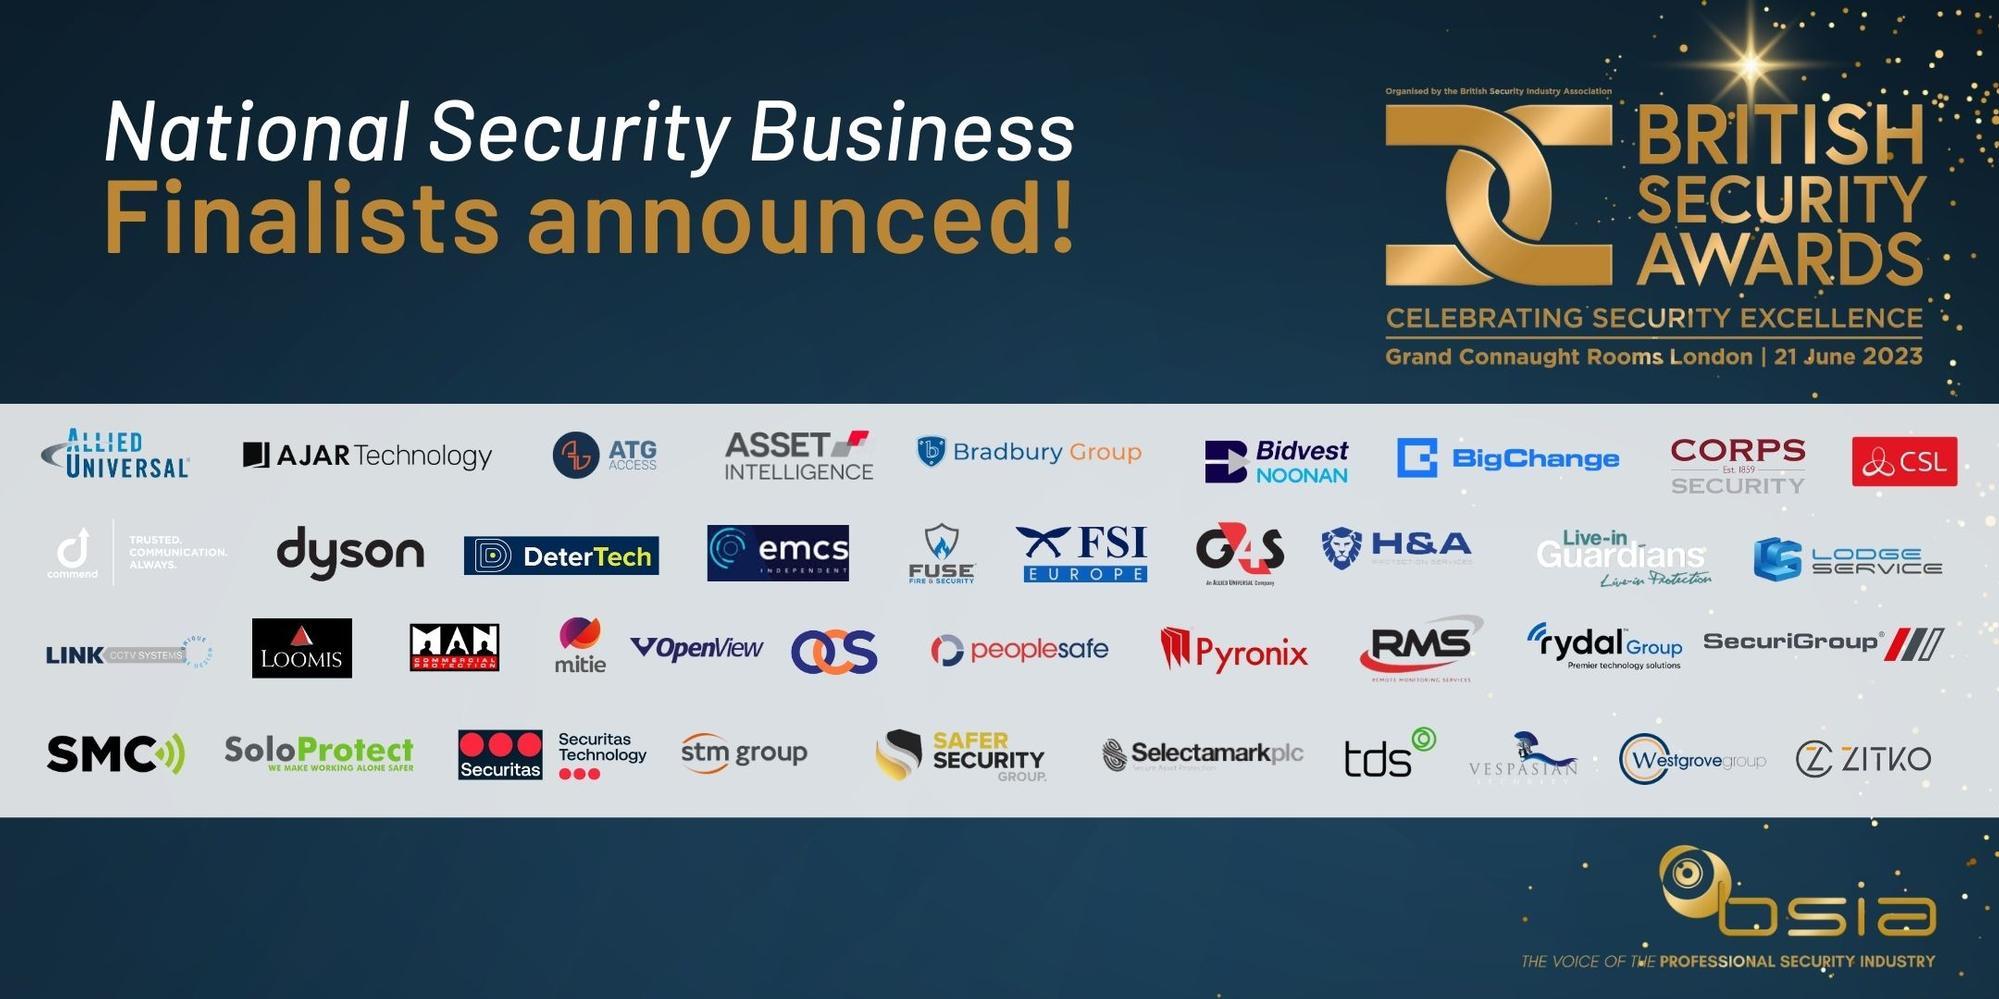 British Security Awards 2023: national finalists announced